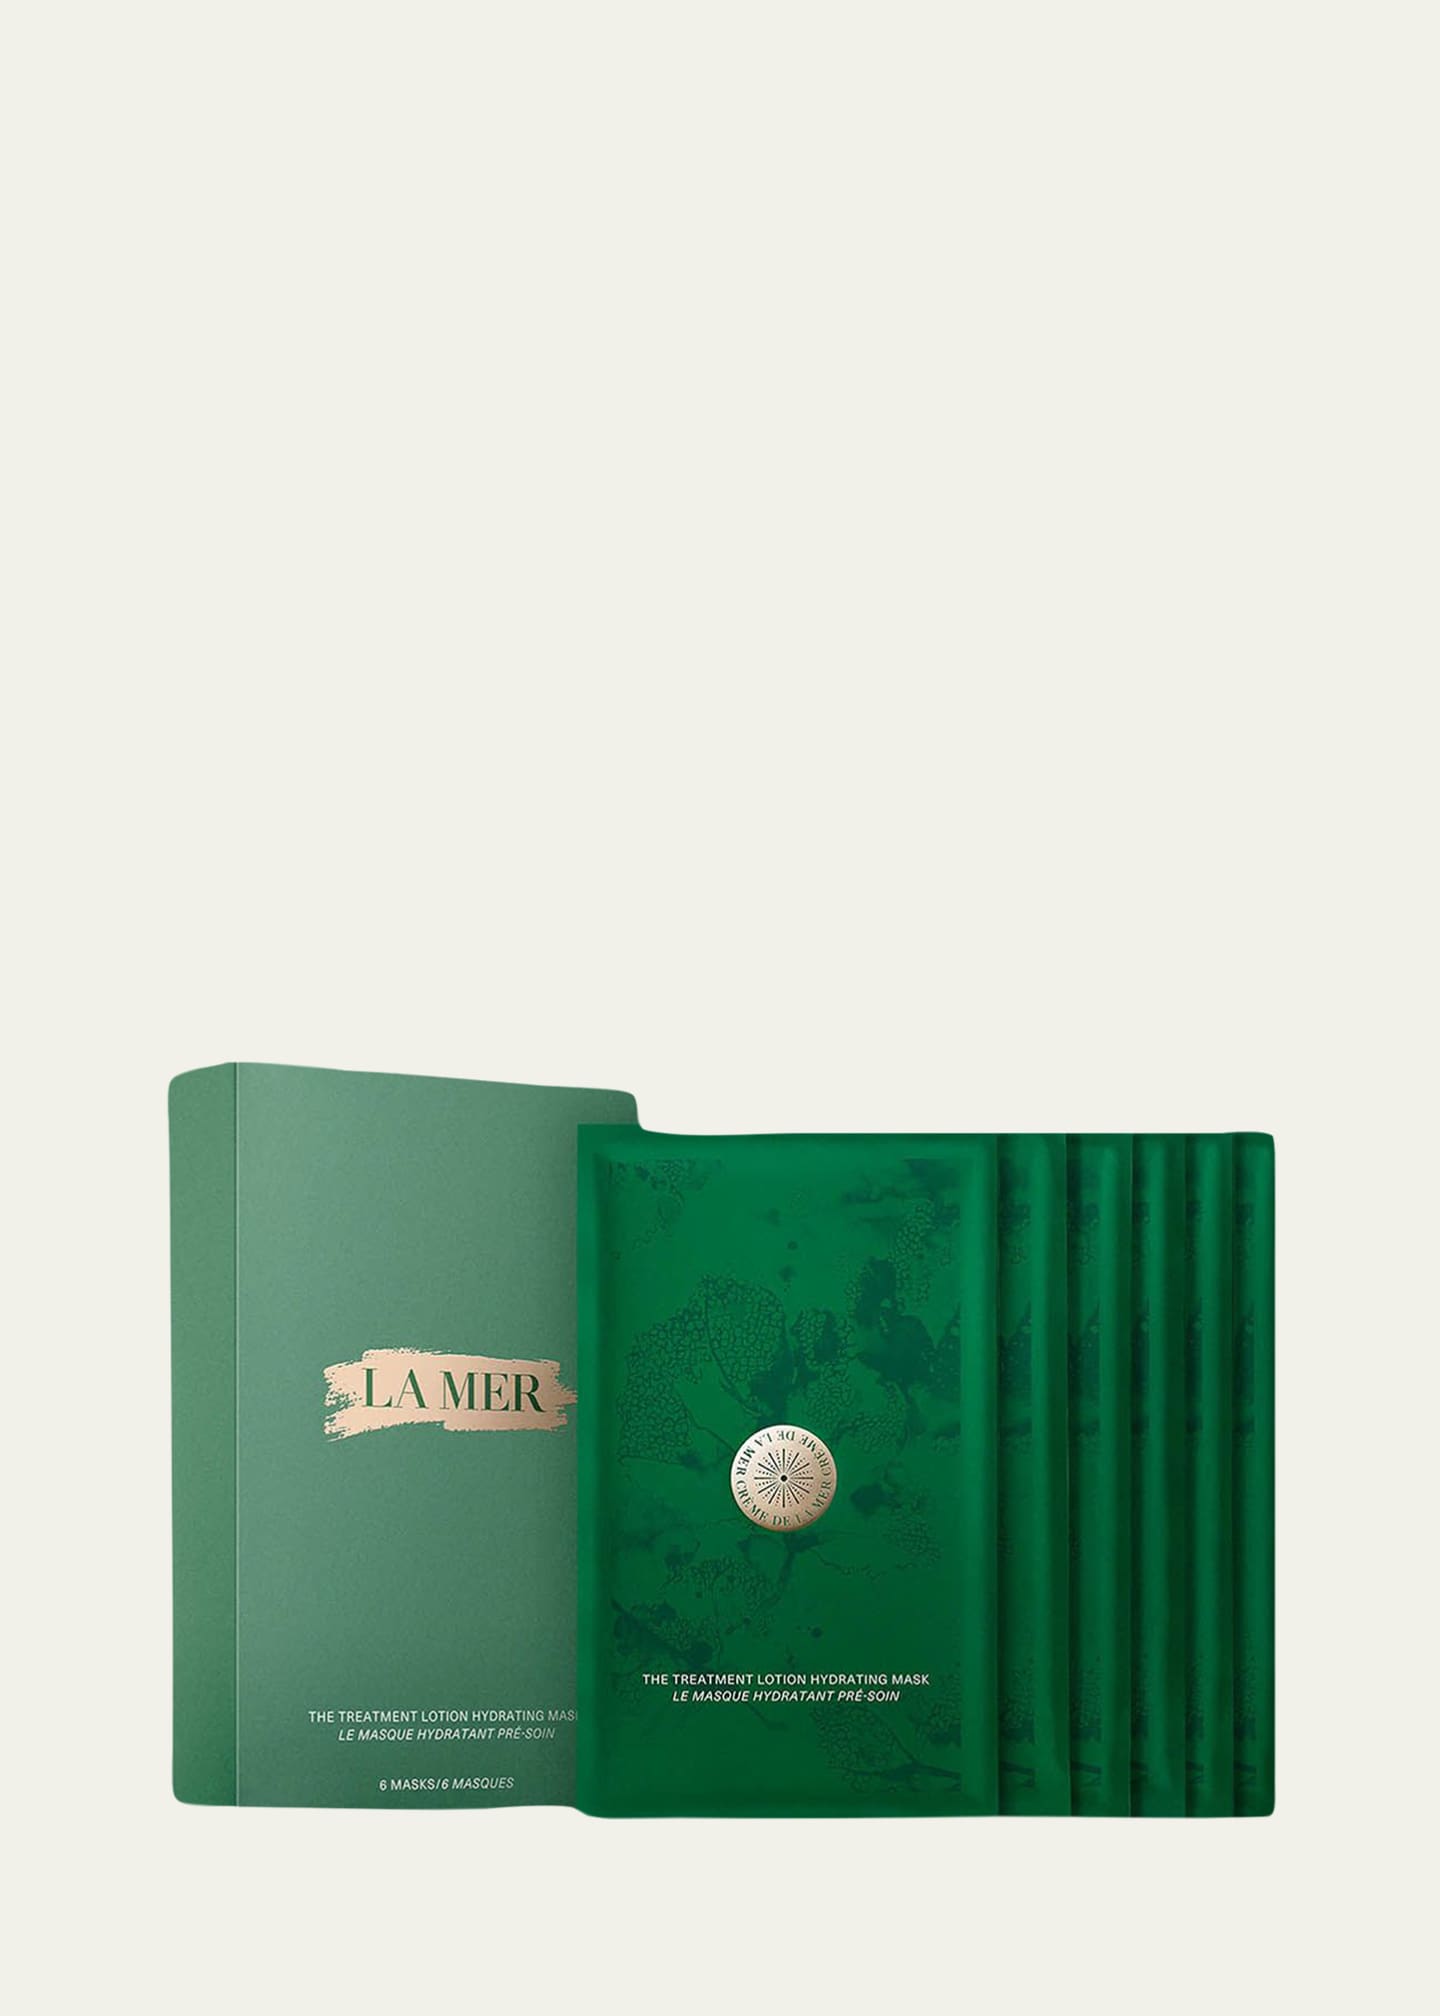 La Mer The Treatment Lotion Hydrating Masks, 6 Pack Image 1 of 4